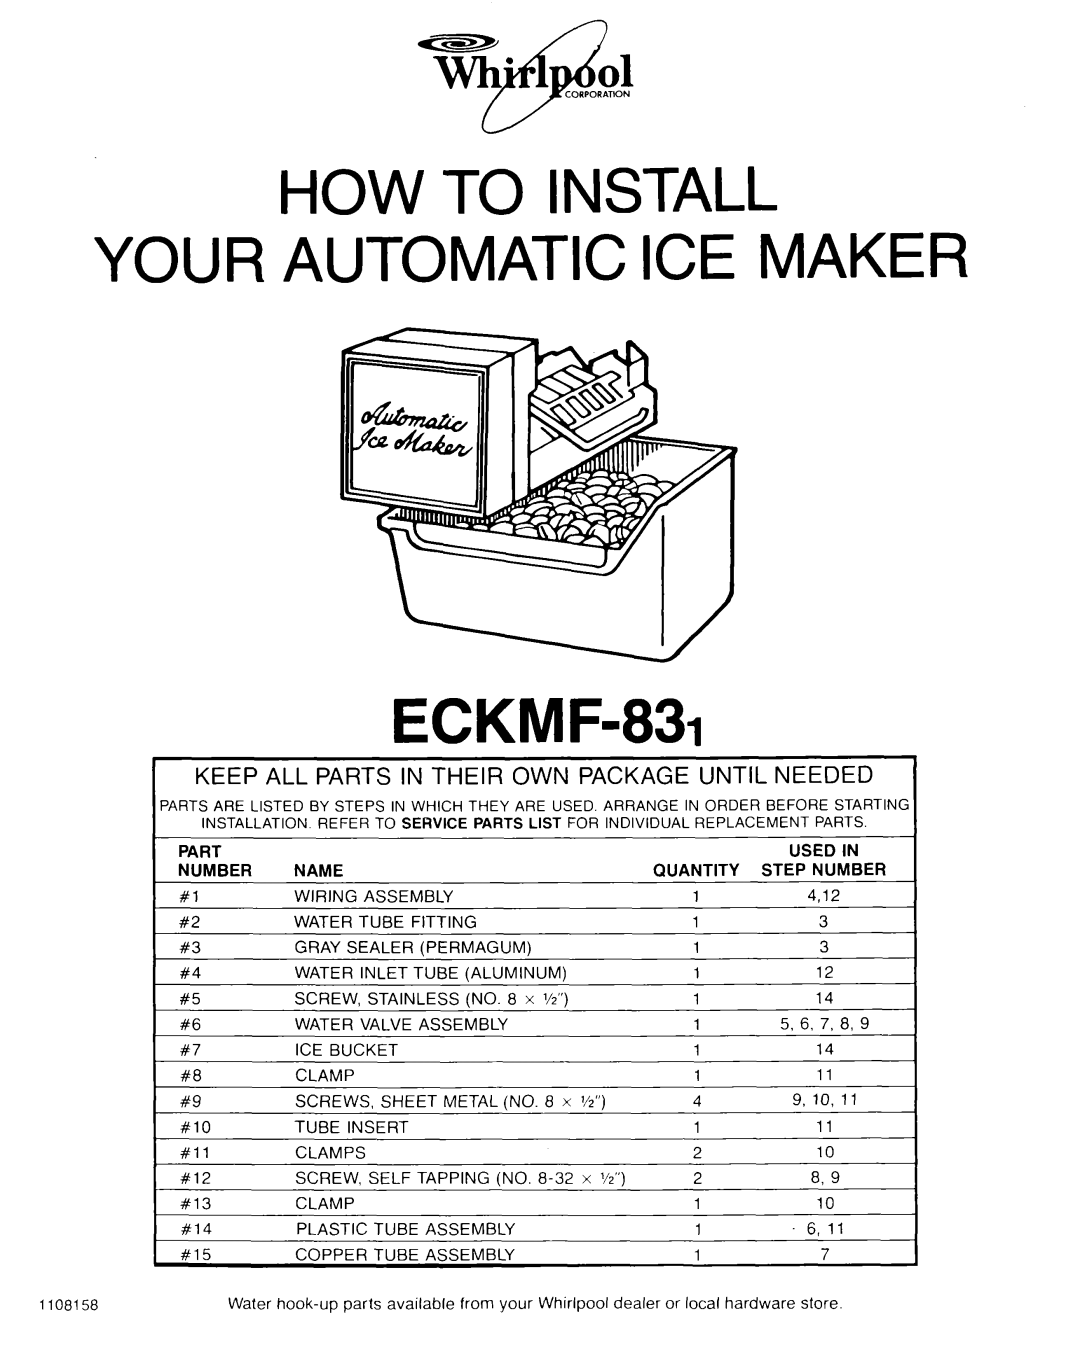 Whirlpool manual HOW TO INSTALL YOUR AUTOMATIC ICE MAKER ECKMF-831, Keep All Parts In Their Own Package Until Needed 